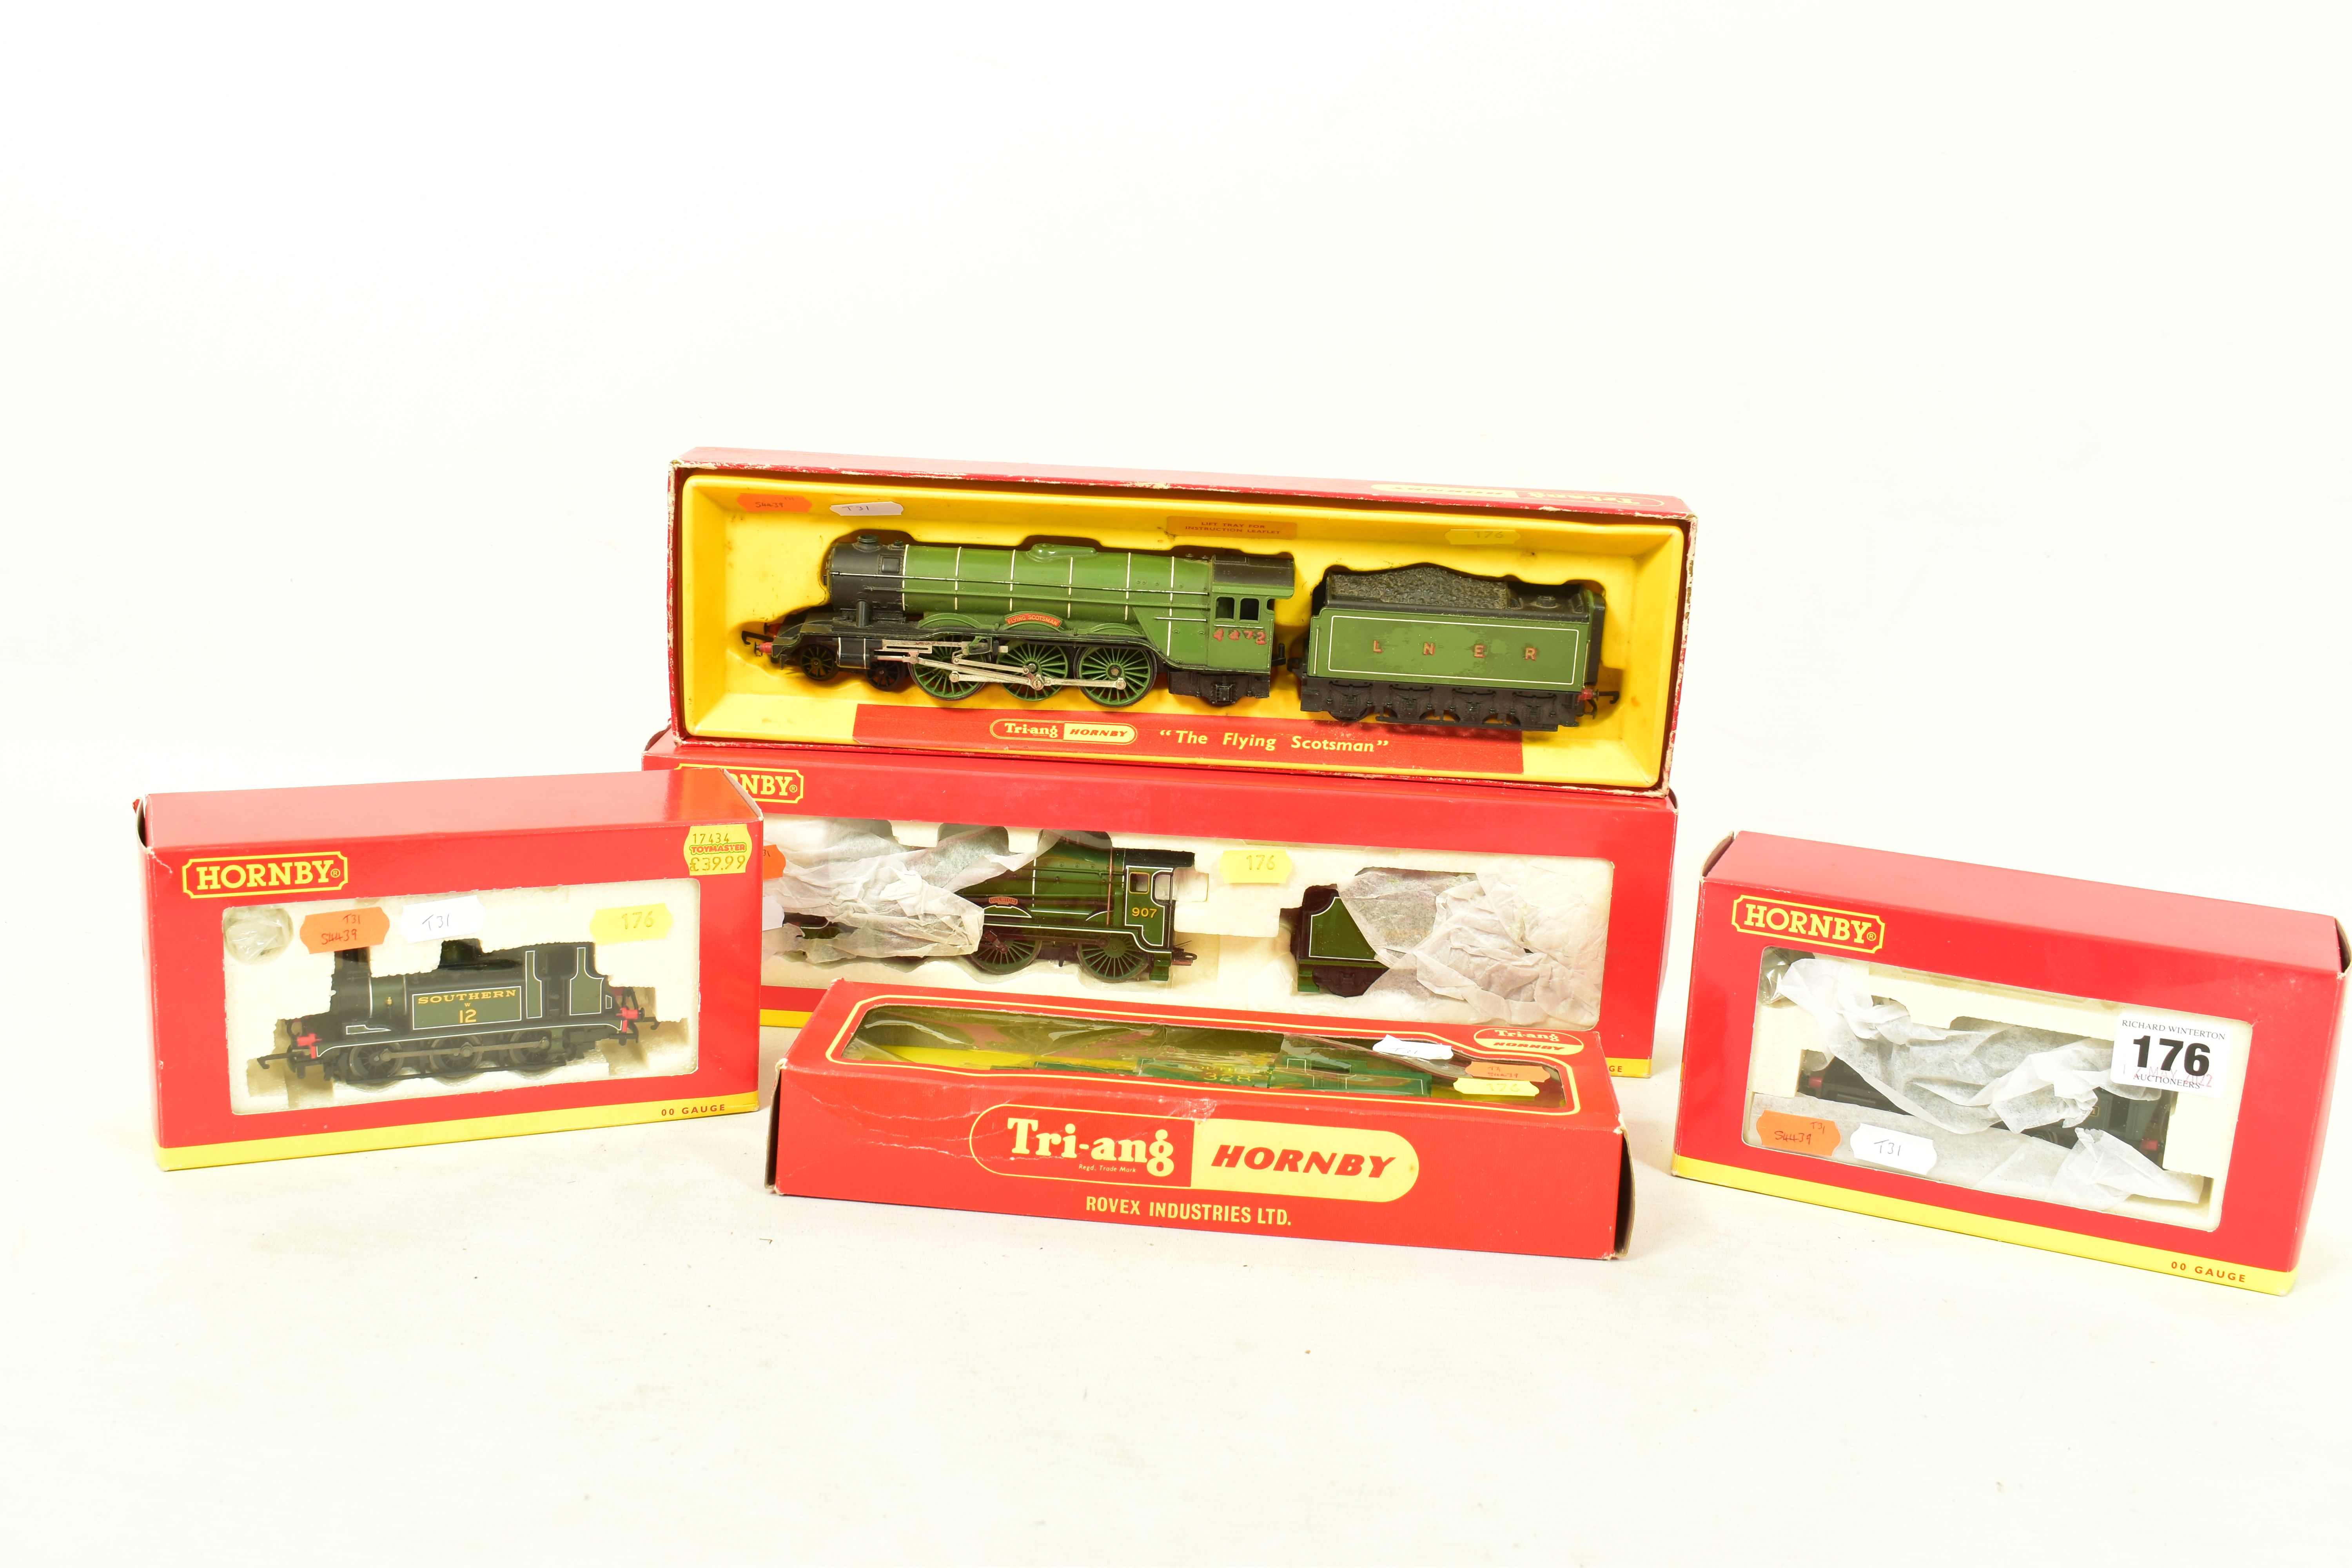 FIVE BOXED TRI-ANG HORNBY AND HORNBY RAILWAYS OO GAUGE LOCOMOTIVES, Tri-ang Hornby class A3 '